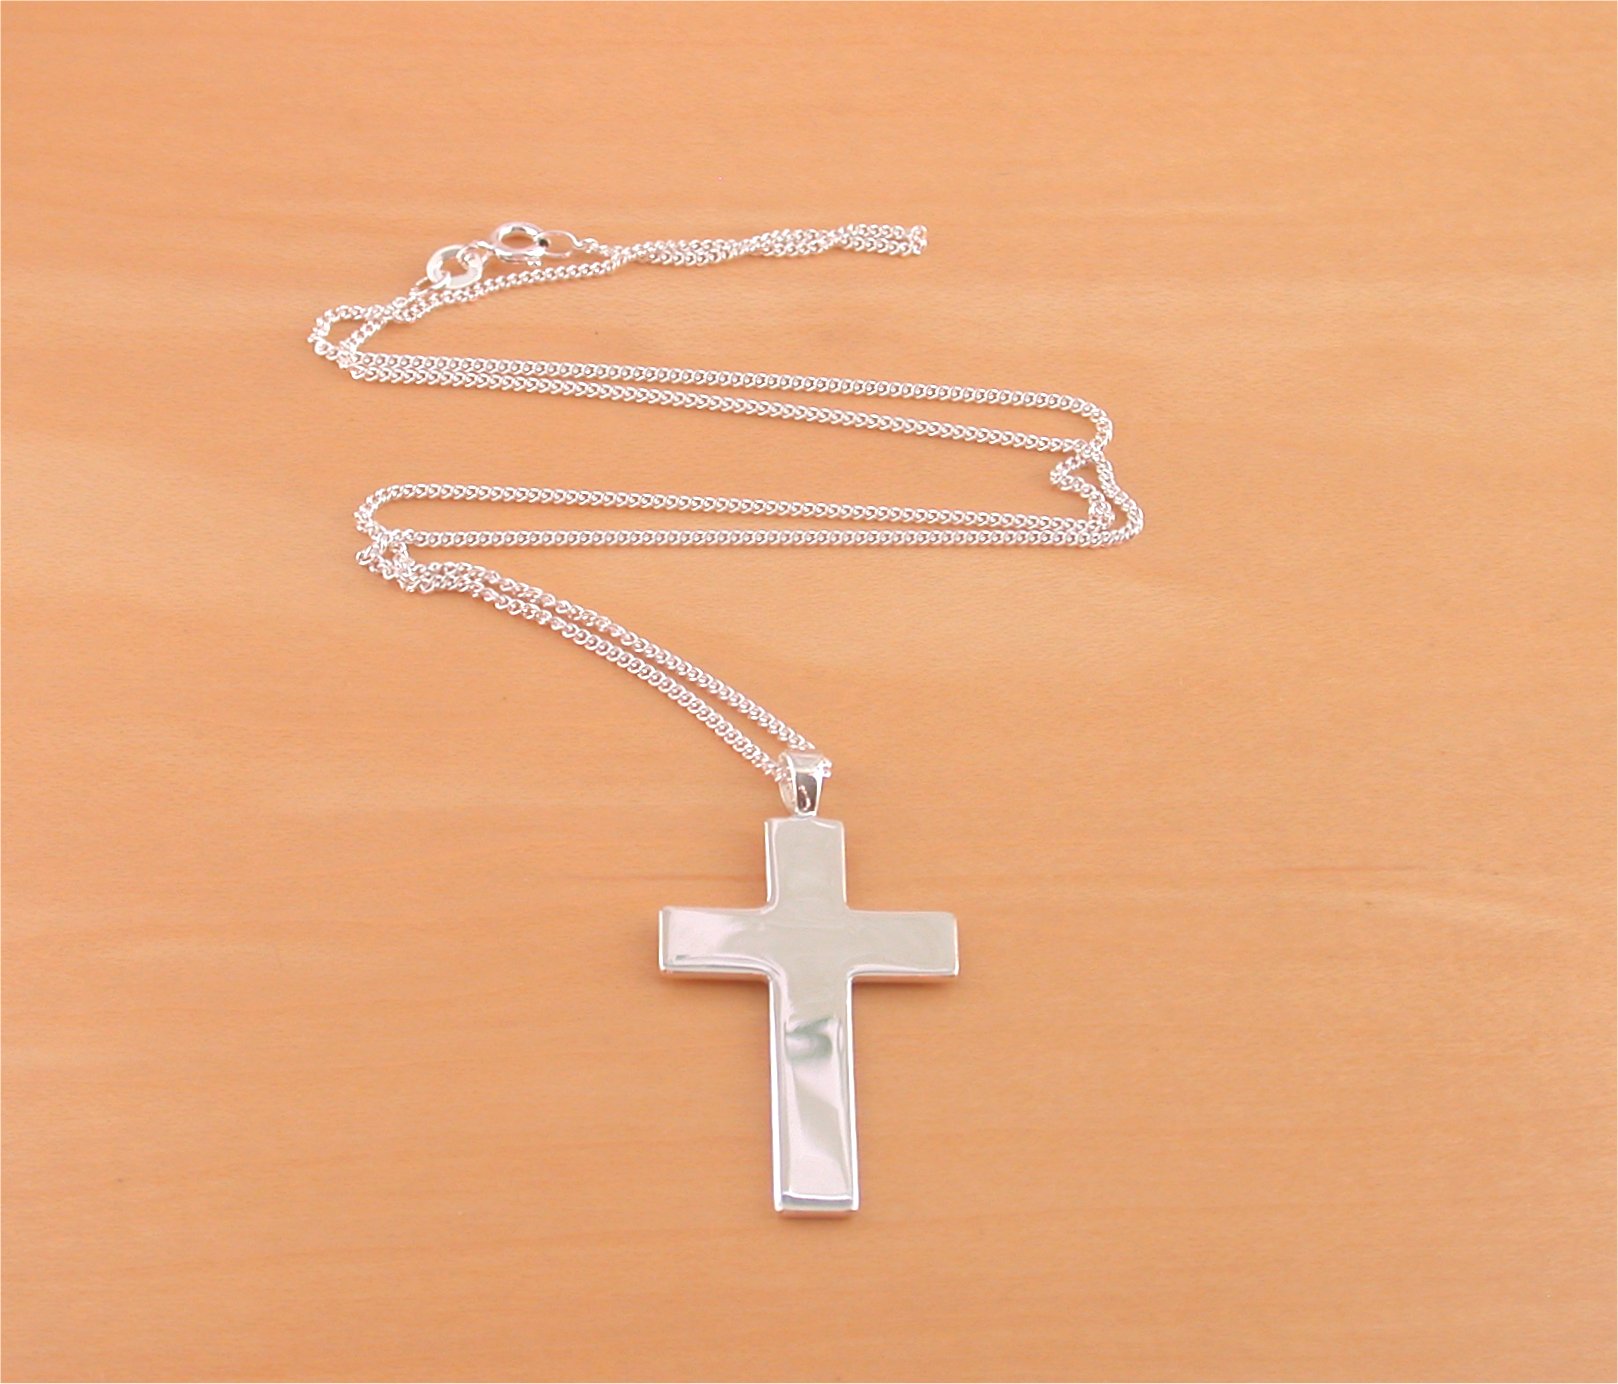 M Men Style IC XC Orthodox Christian Baptismal Cross Jewelry Silver  Stainless Steel Pendant Necklace Chain For Men And Women